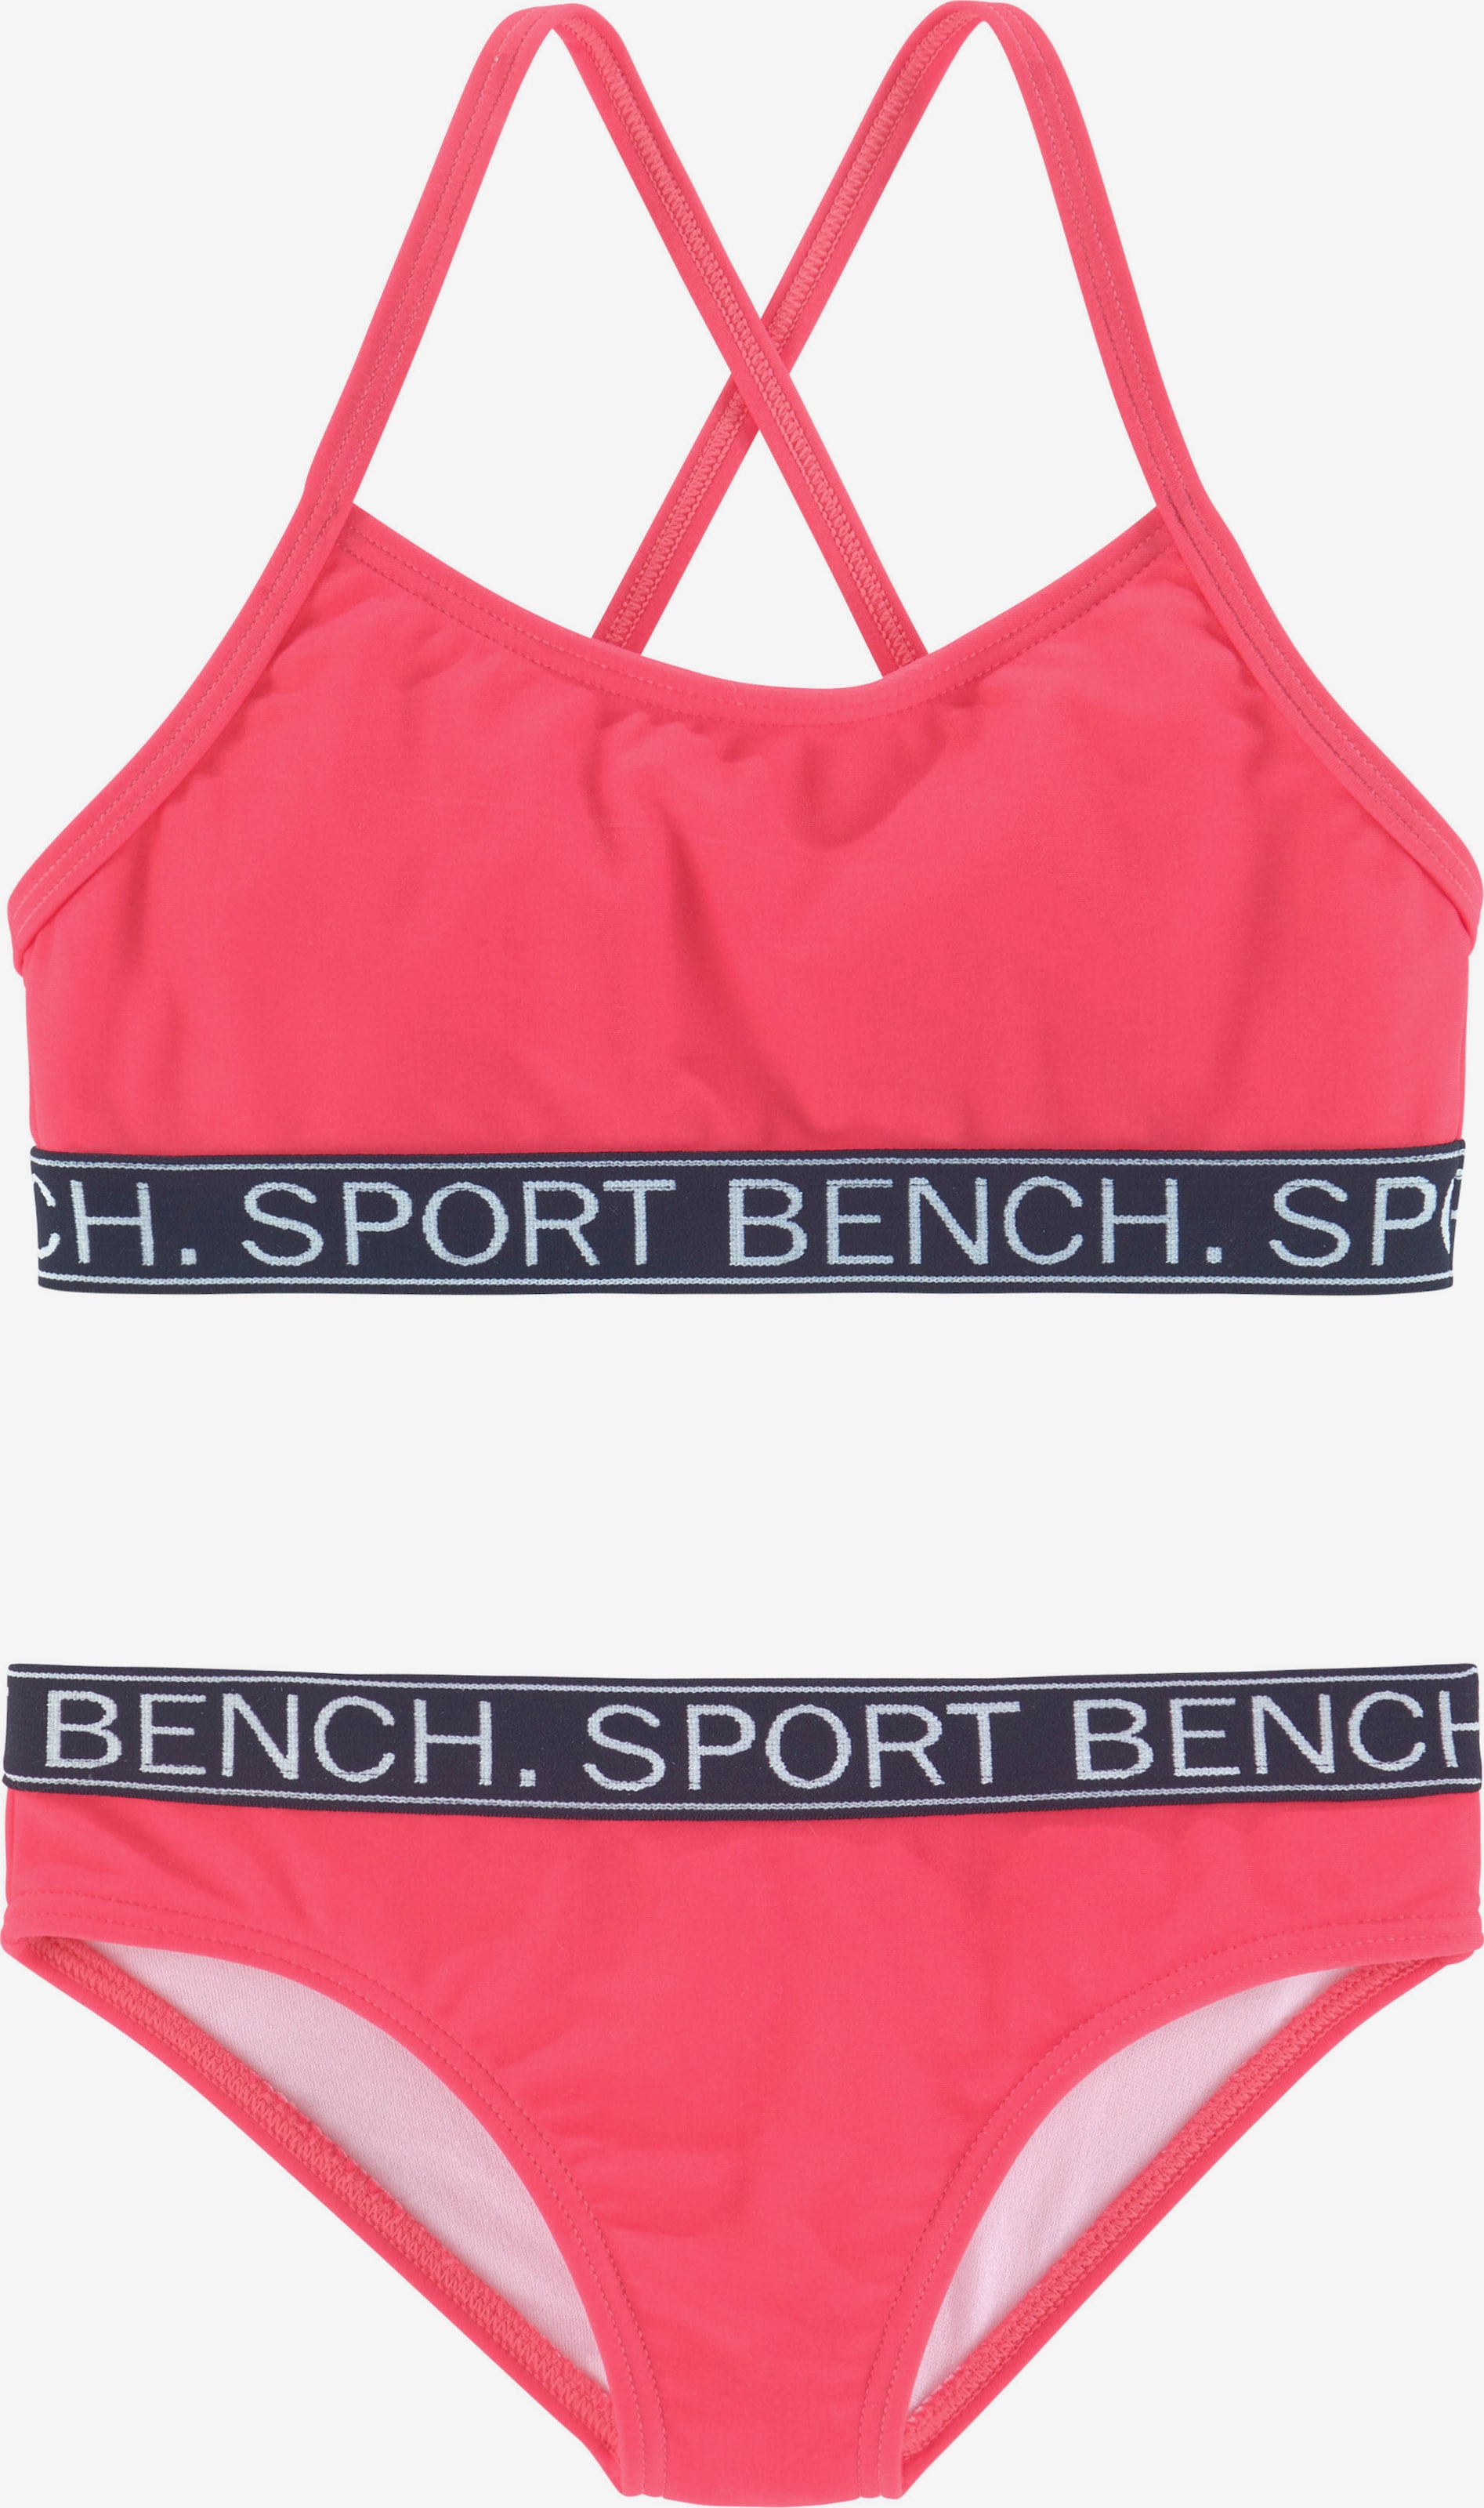 | in Bikini YOU Pink BENCH ABOUT Bustier